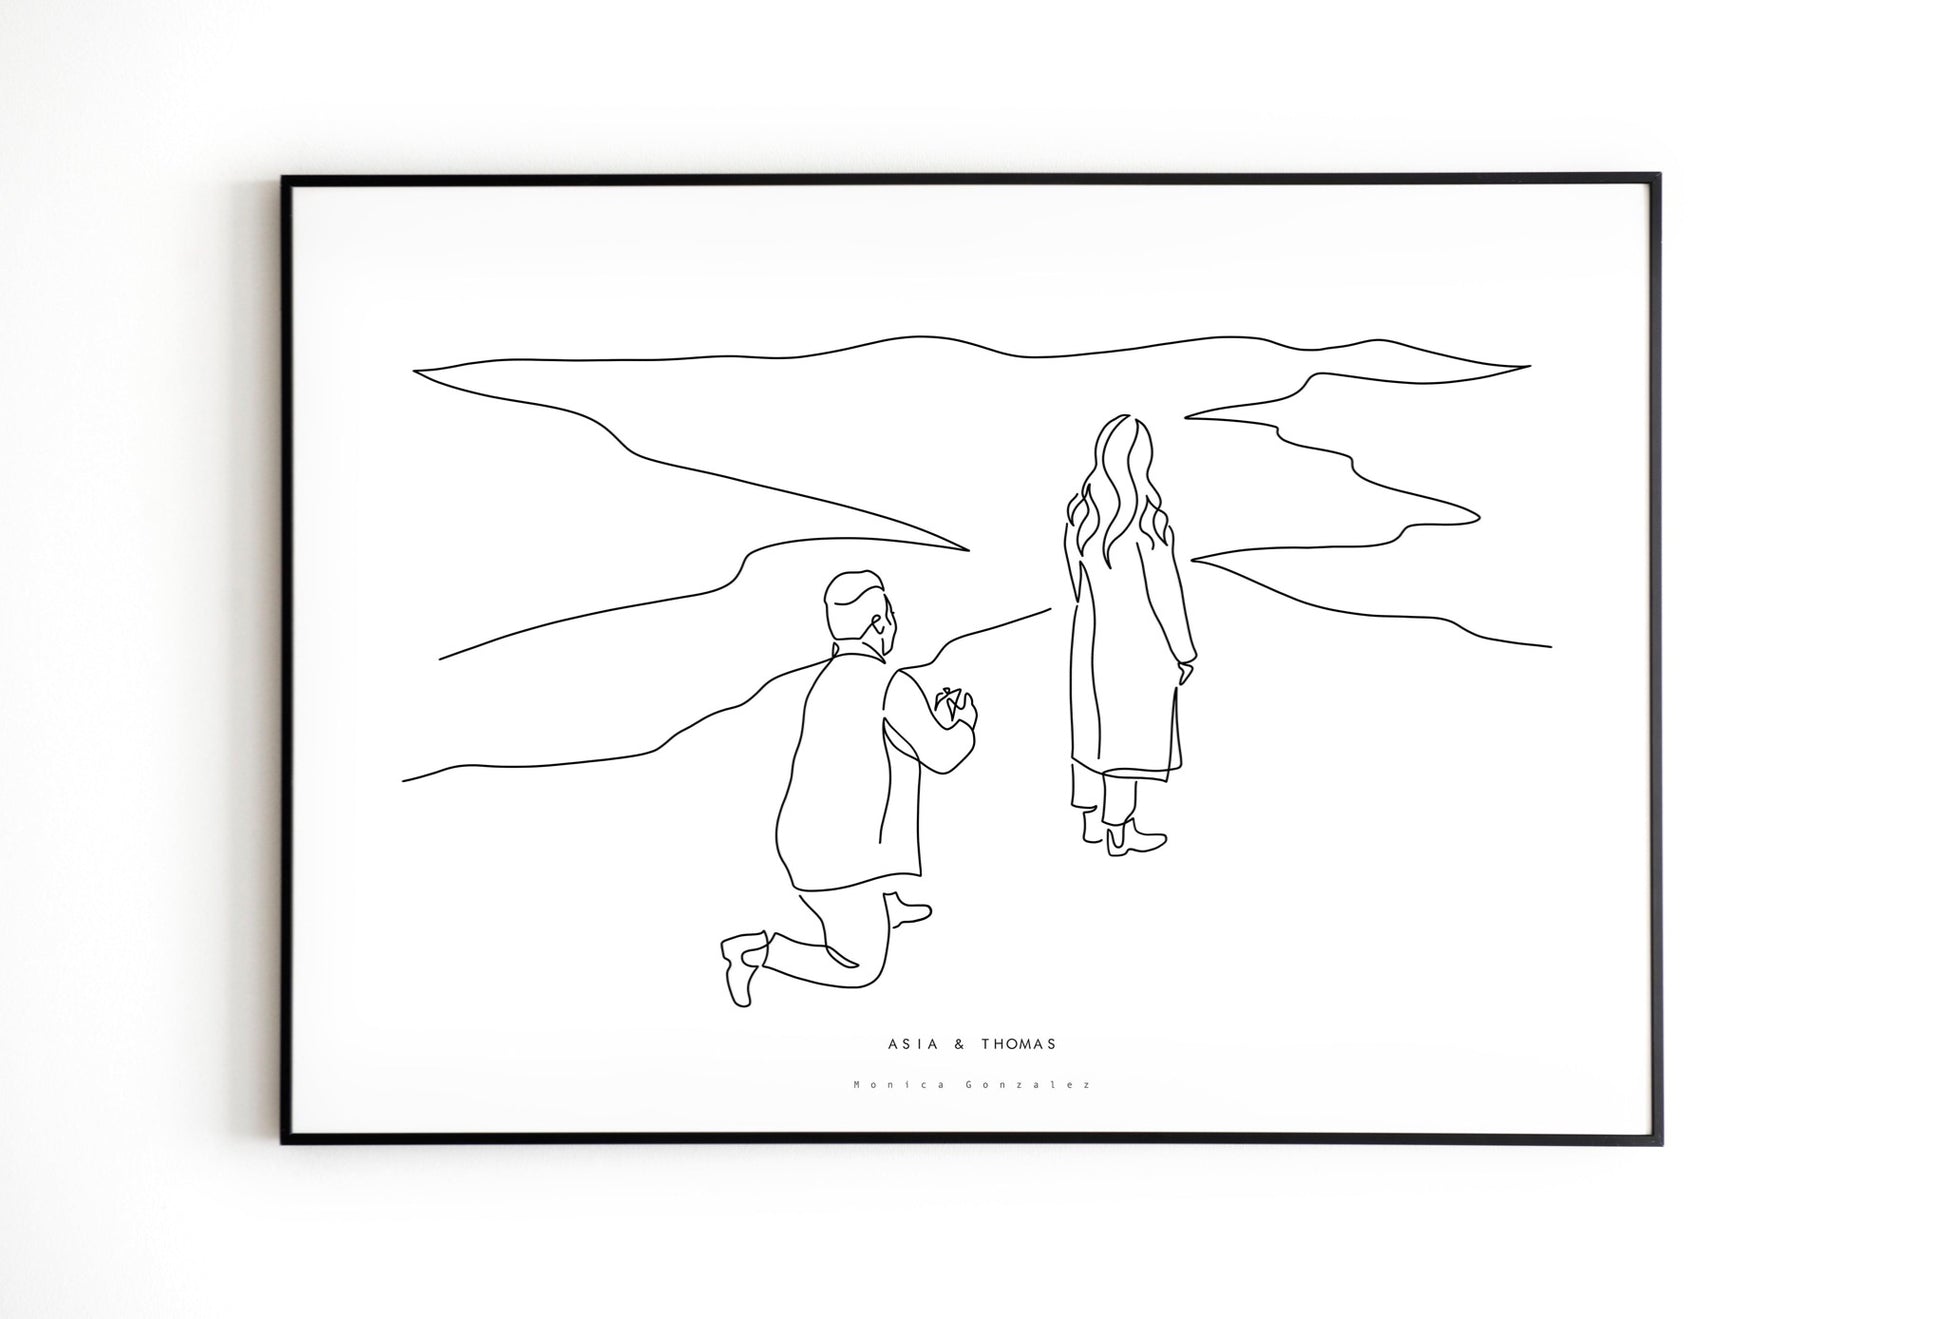 Line drawing of a couple in their engagement proposal moment